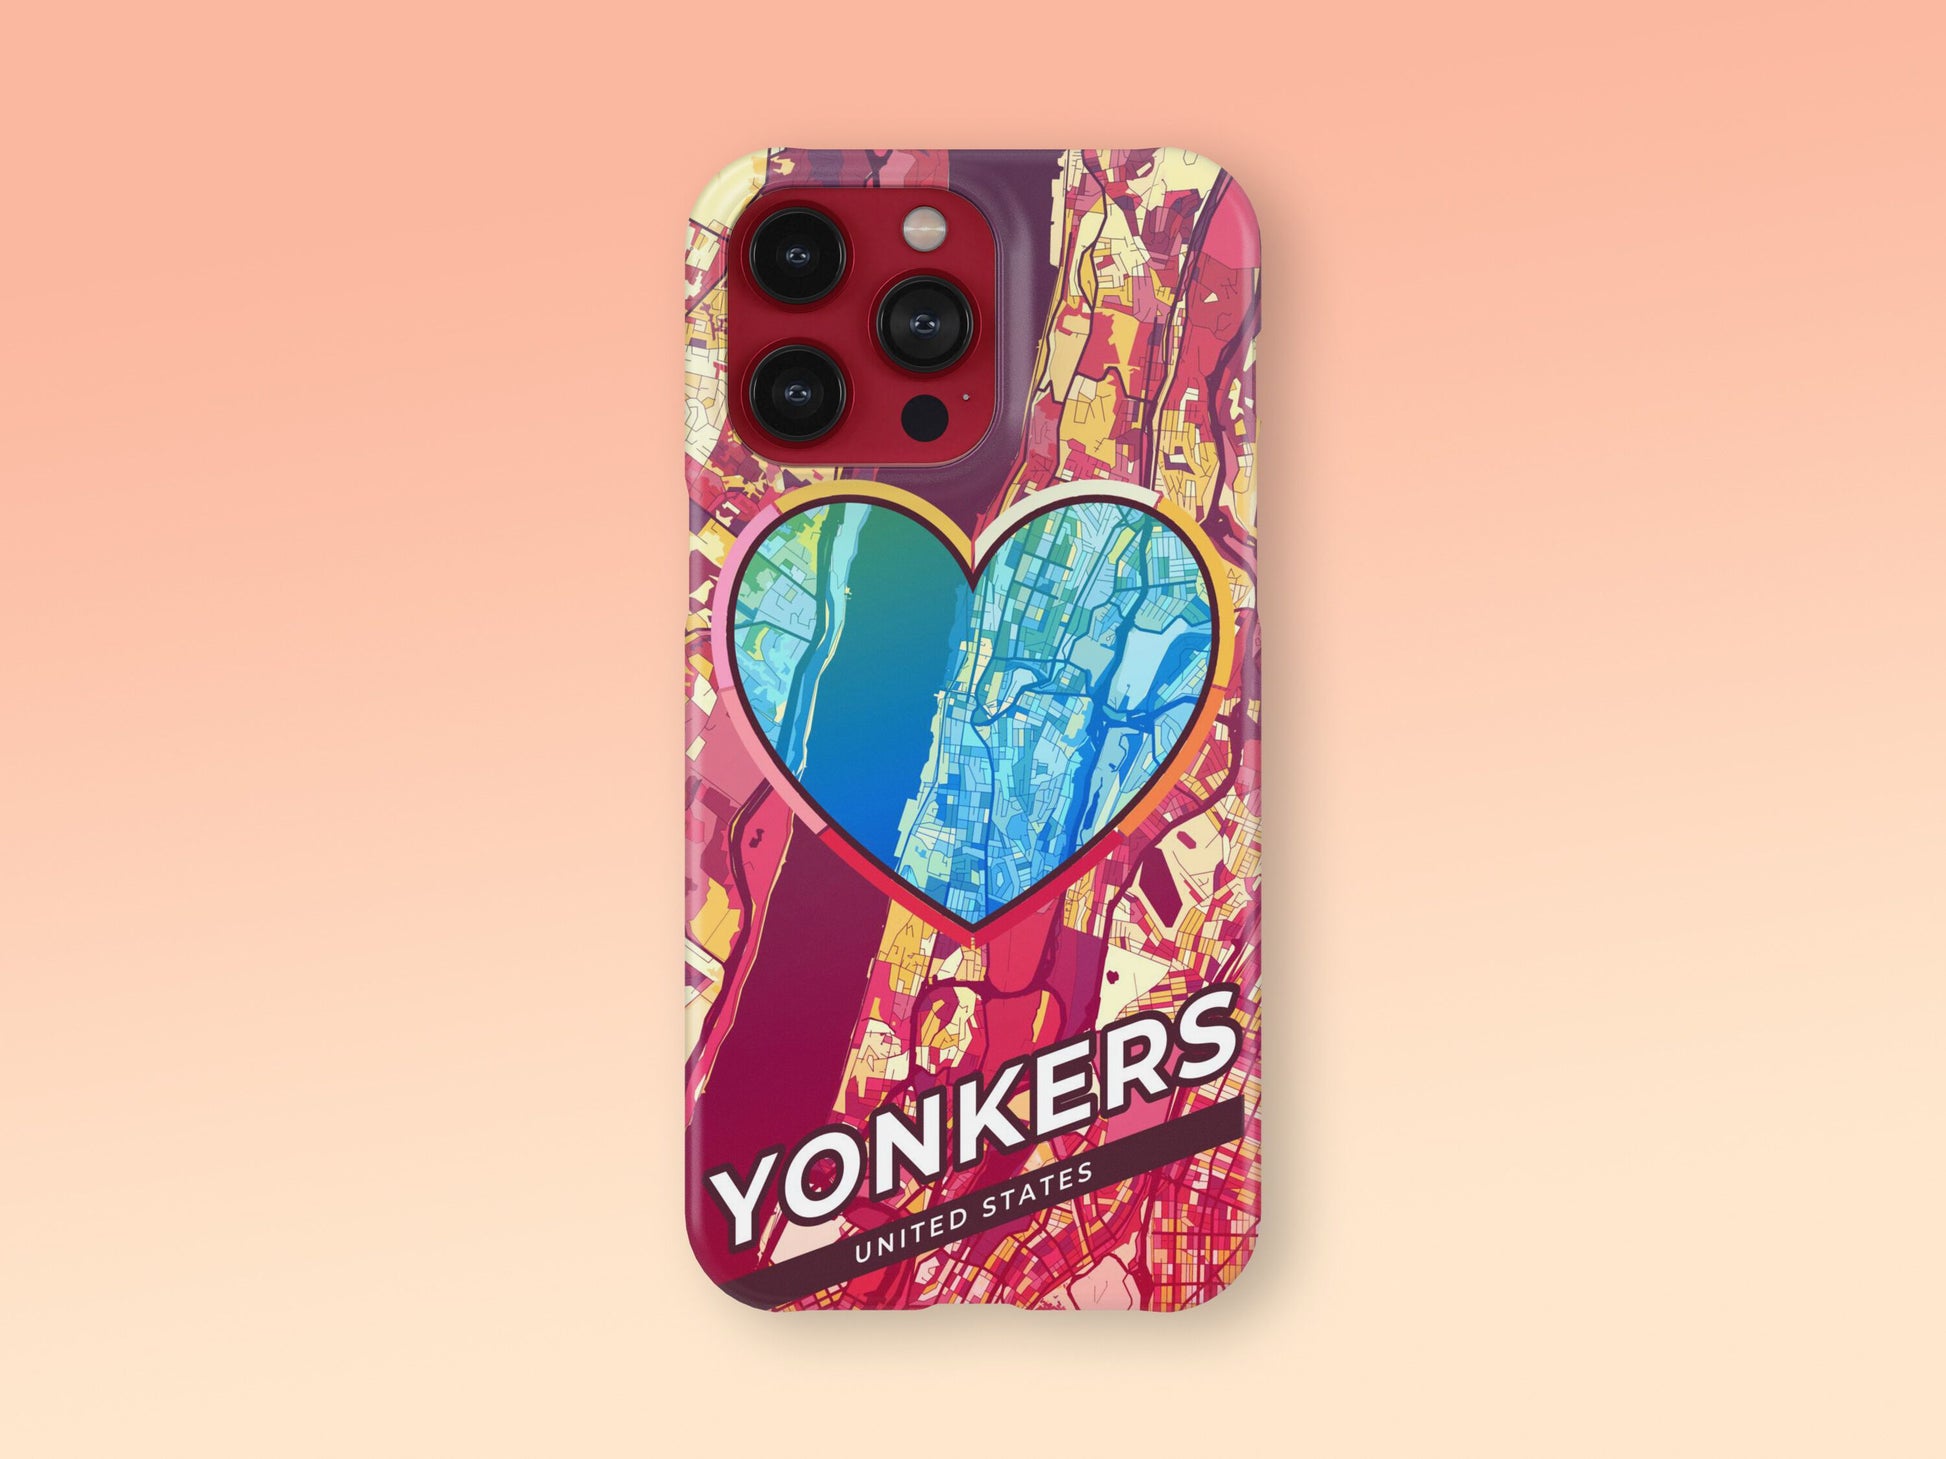 Yonkers New York slim phone case with colorful icon 2